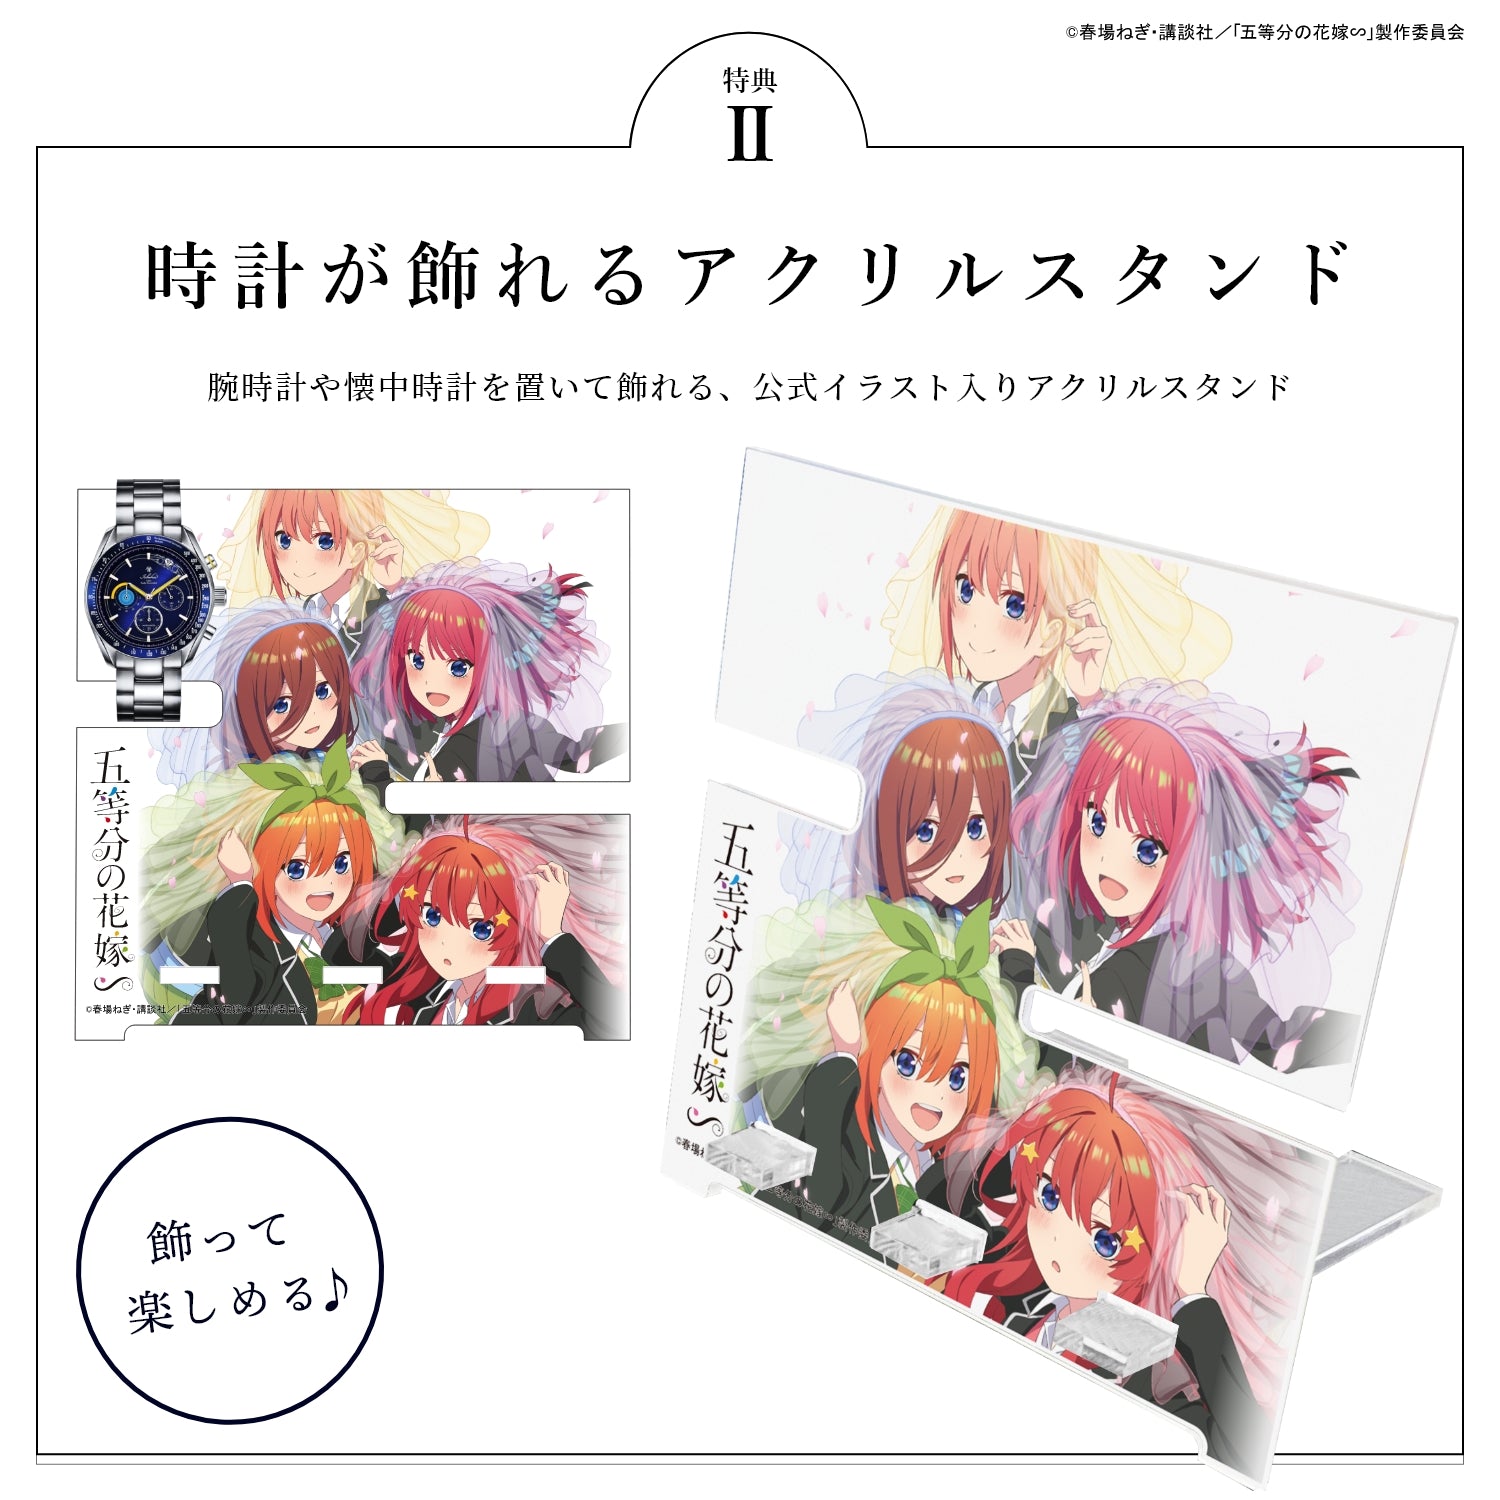 TV special anime“The Quintessential Quintuplets” Radio Solar Chronograph Winter Special model Change with belt| Ichika Nakano